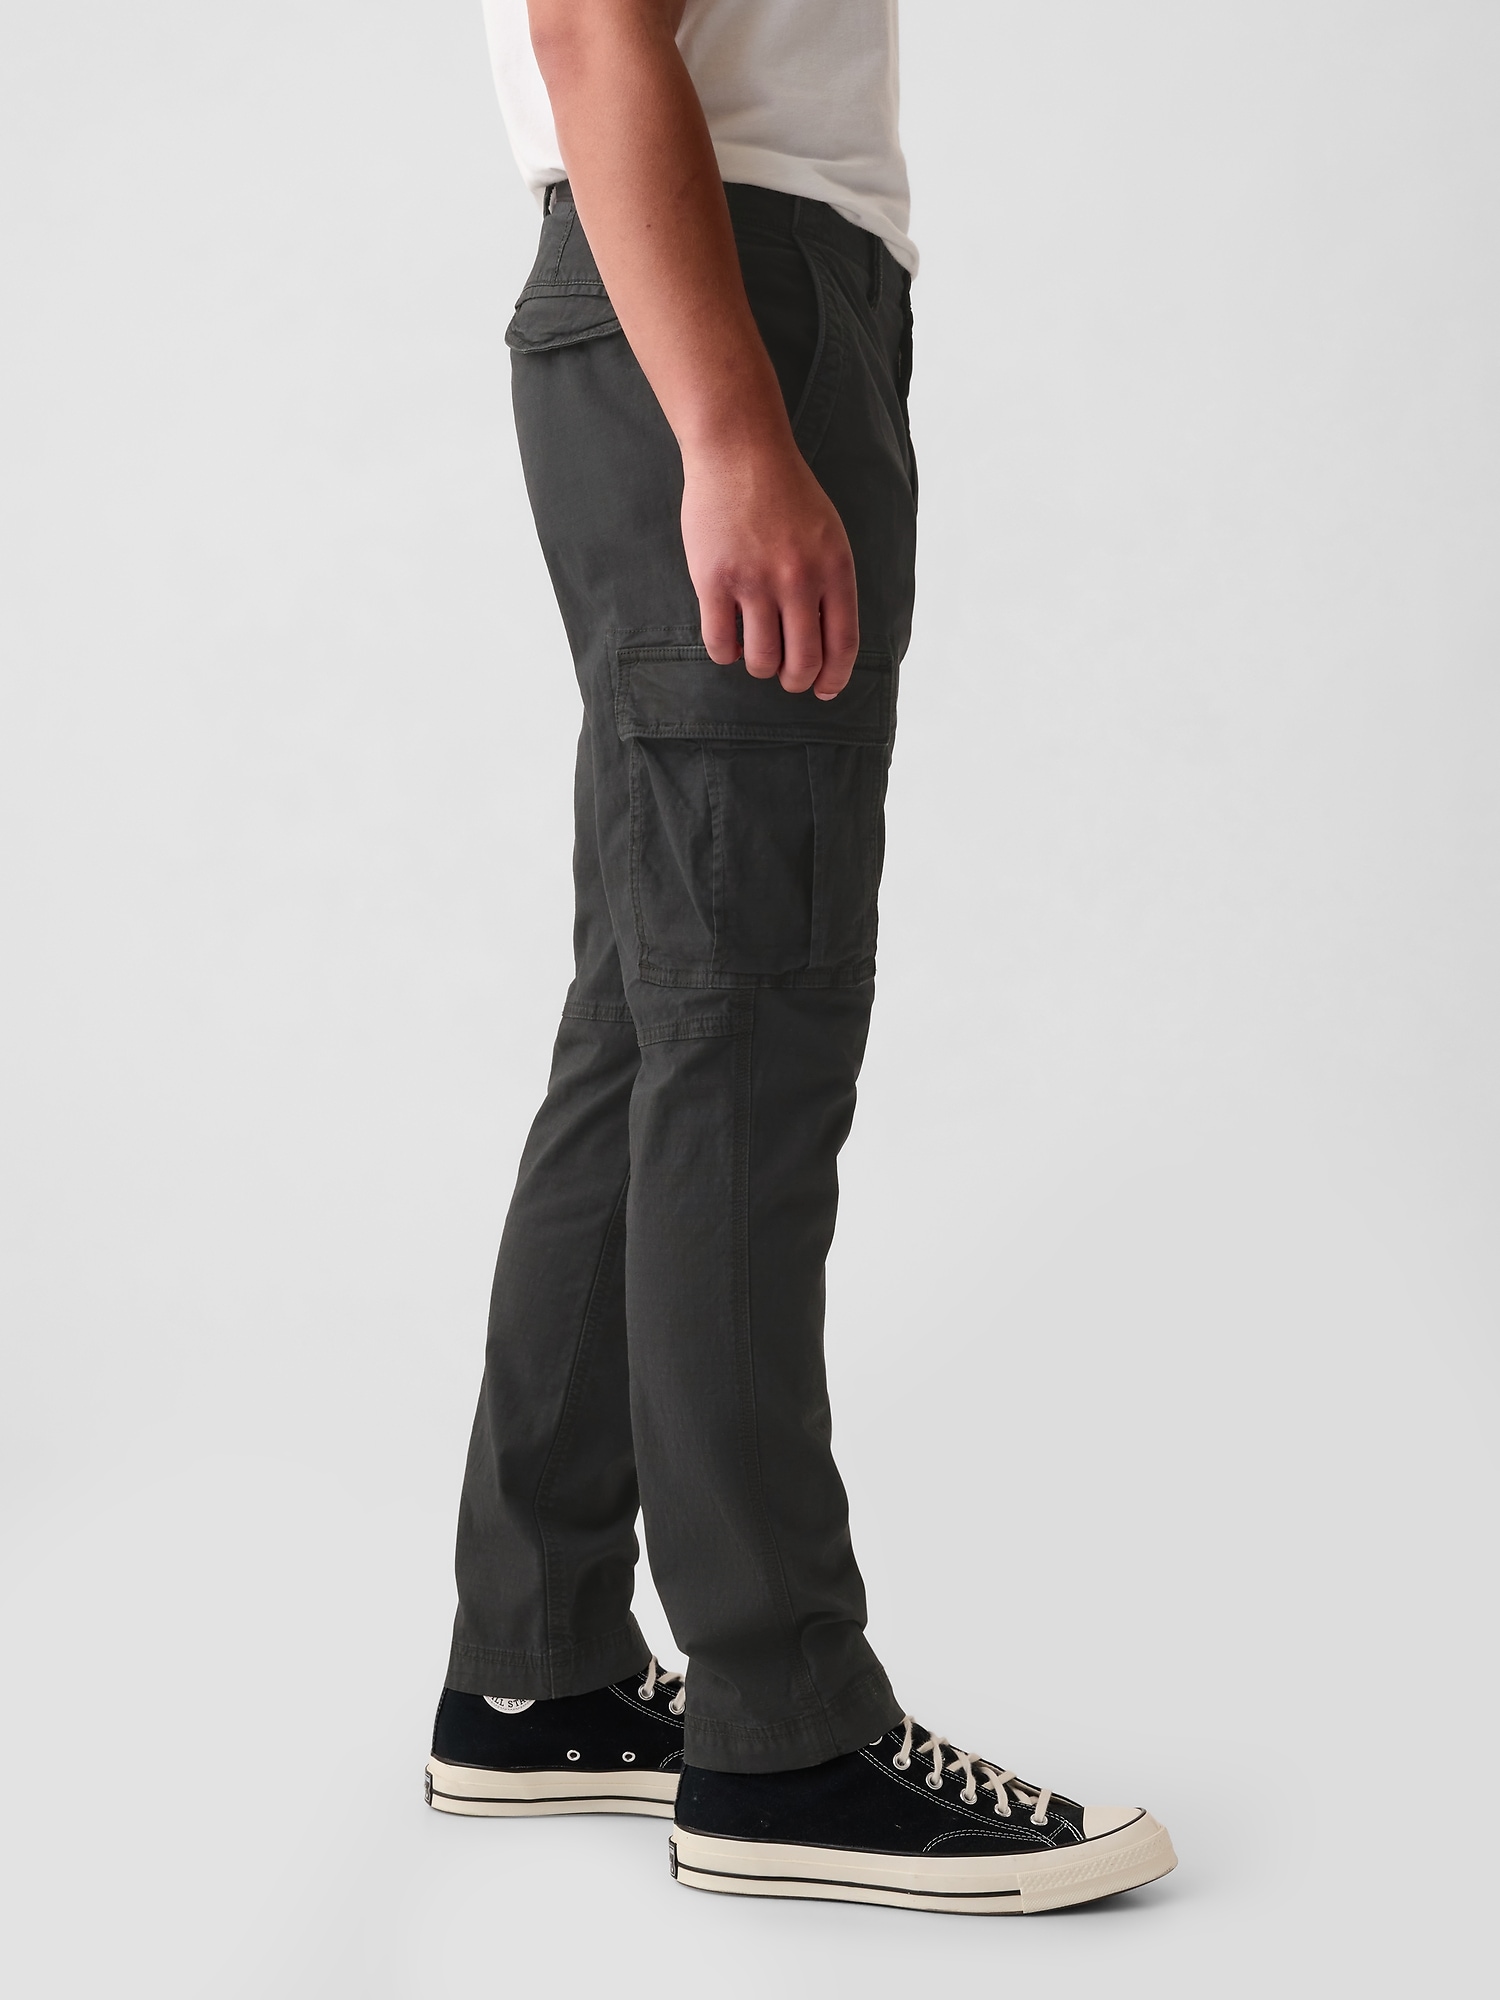 Lenago Cargo Pants for Men's Cargo Trousers Work Wear Combat Safety Cargo 6  Pocket Full Pants on Clearance under 10